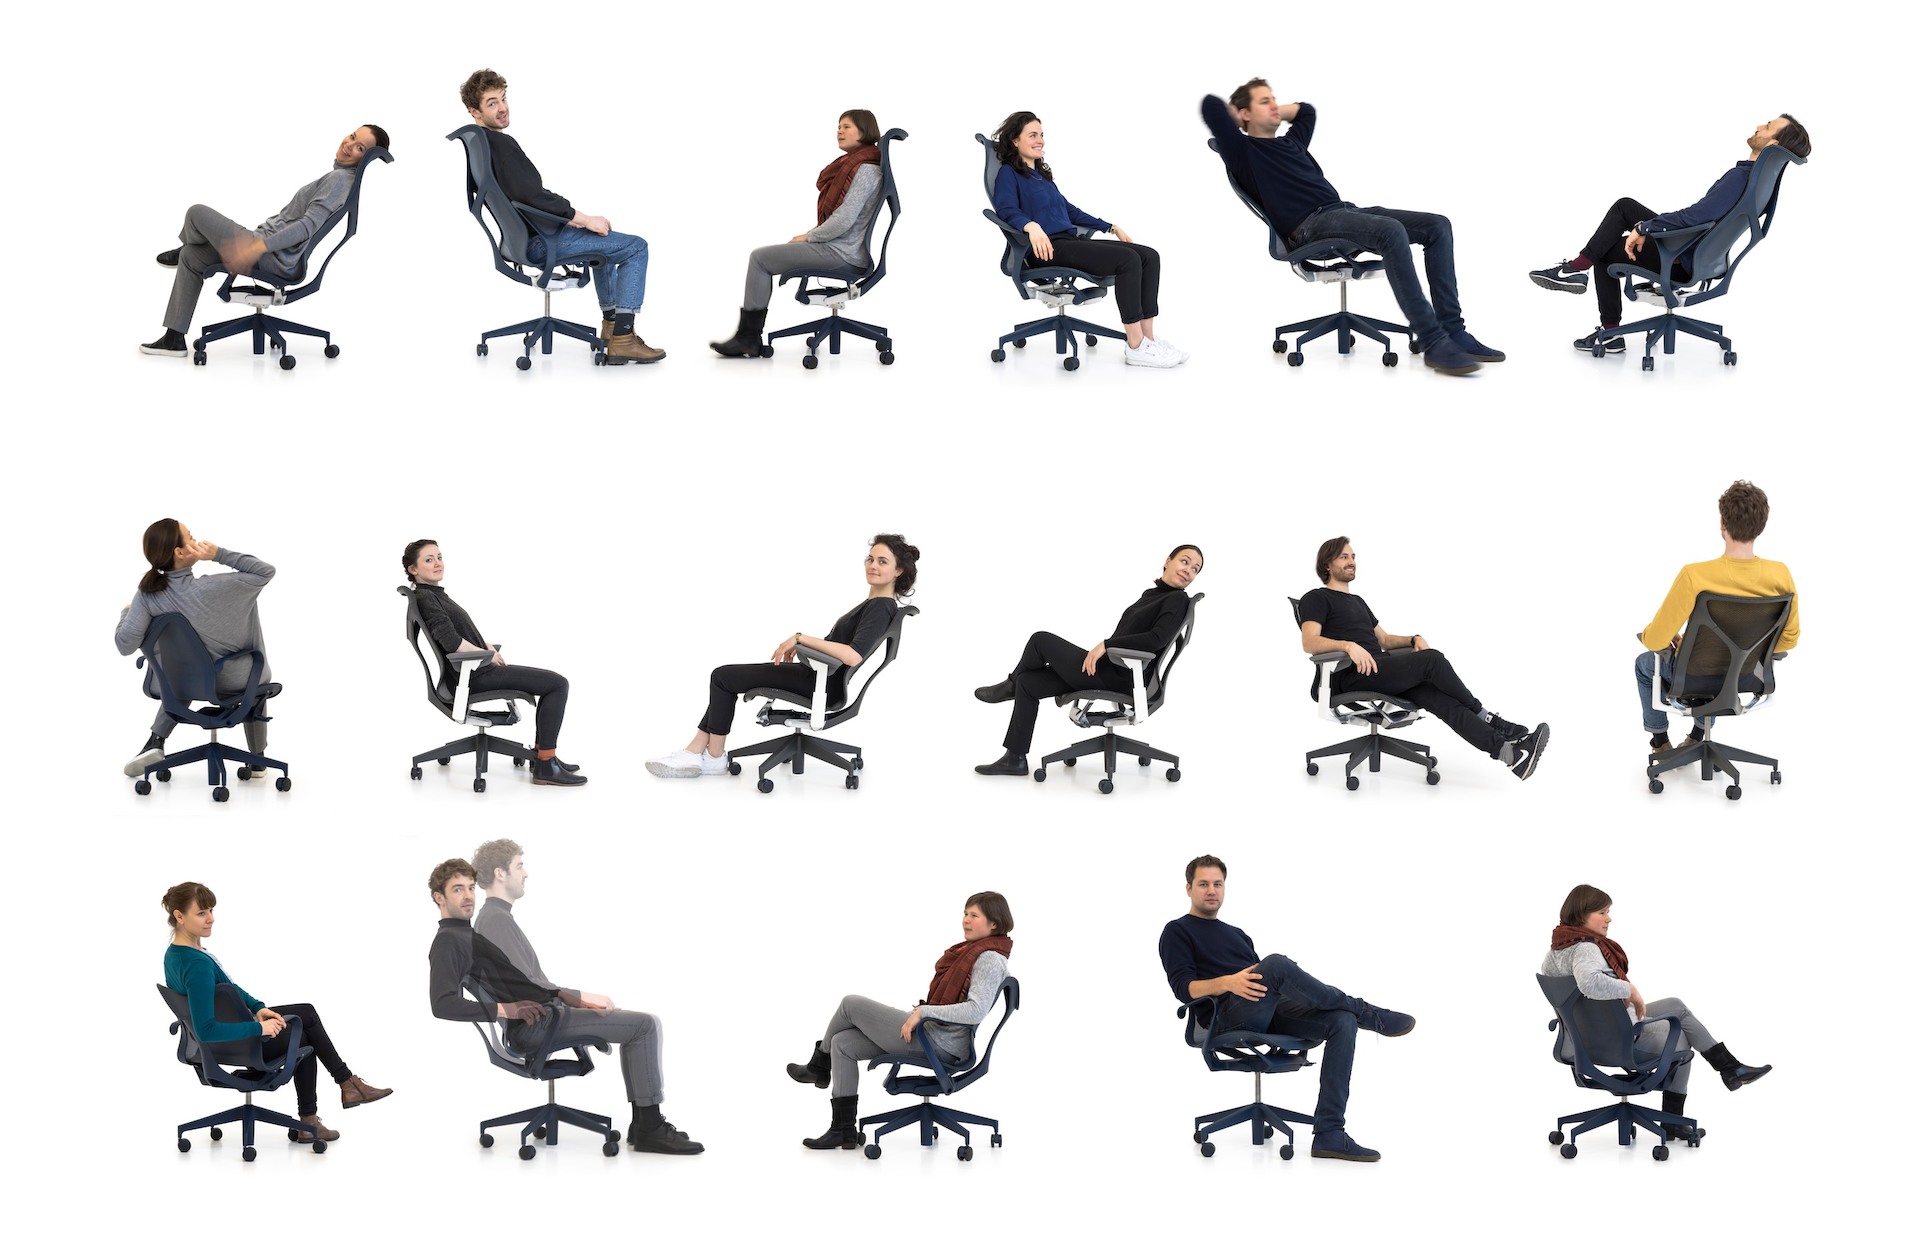 A variety of members of Studio 7.5 sitting in low-, mid-, and high-back Cosm Chairs, reclining, sitting forward, and relaxing.